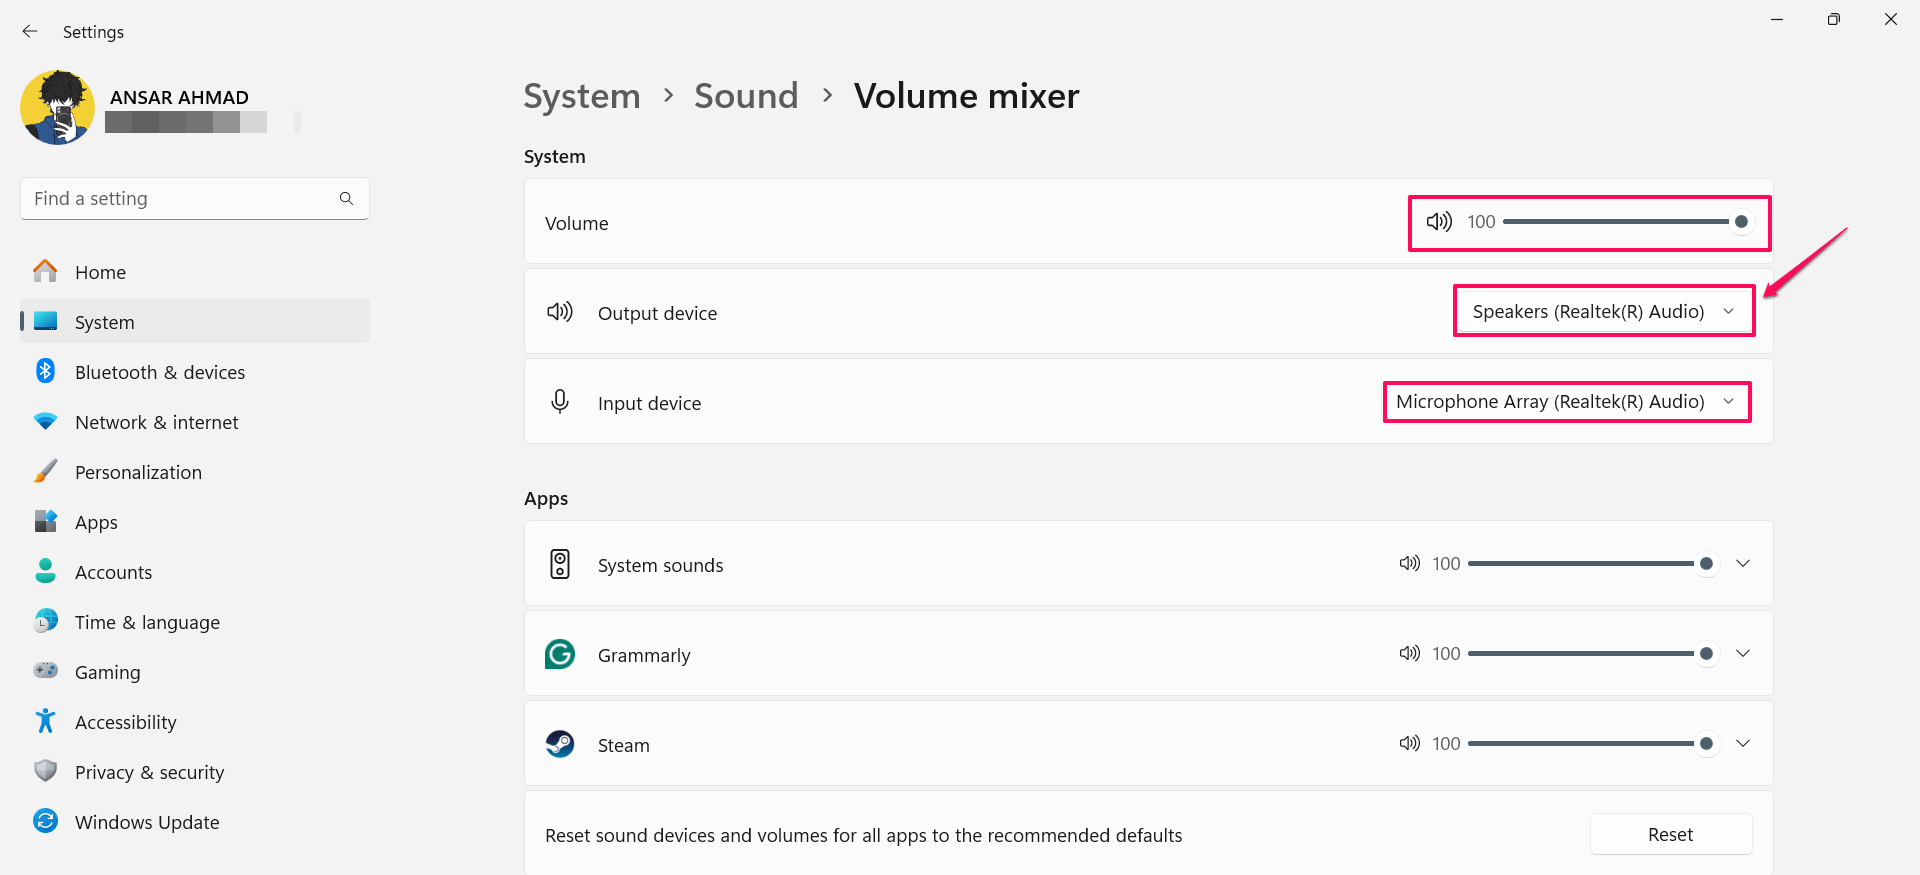 Choose the correct audio input and increase the volume slider